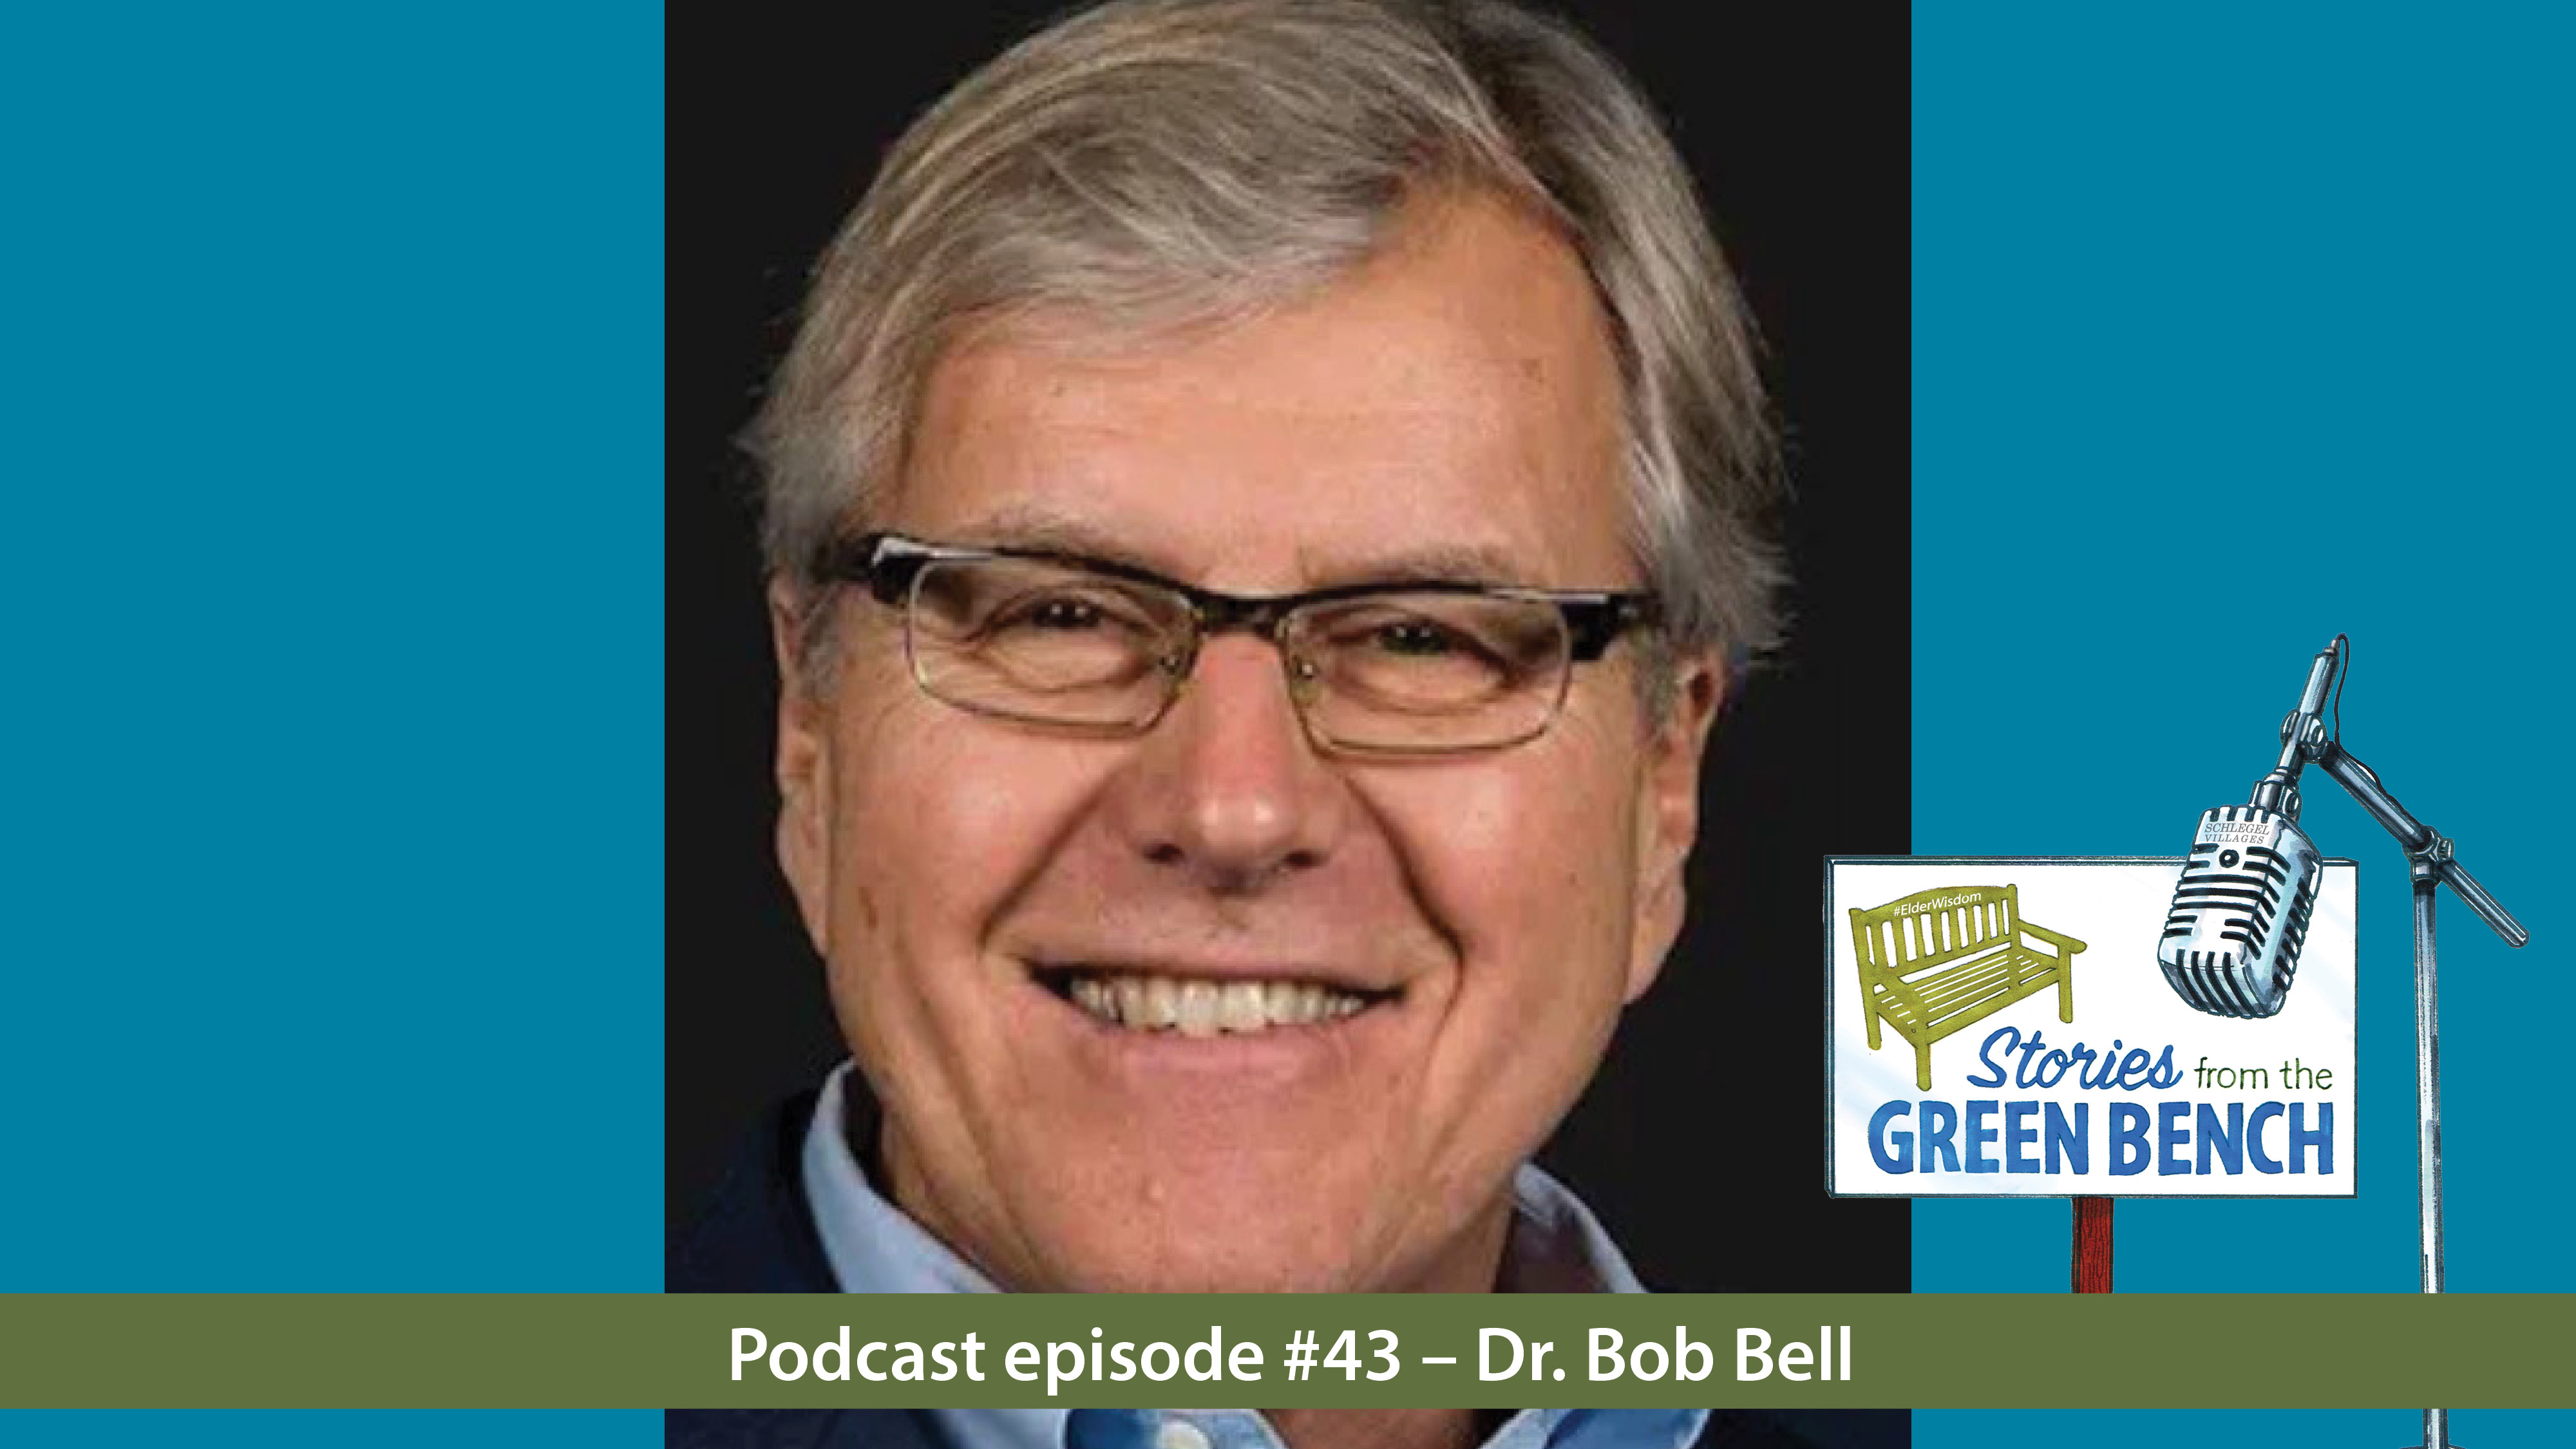 Dr. Bob Bell in promotion of the ElderWisdom podcast